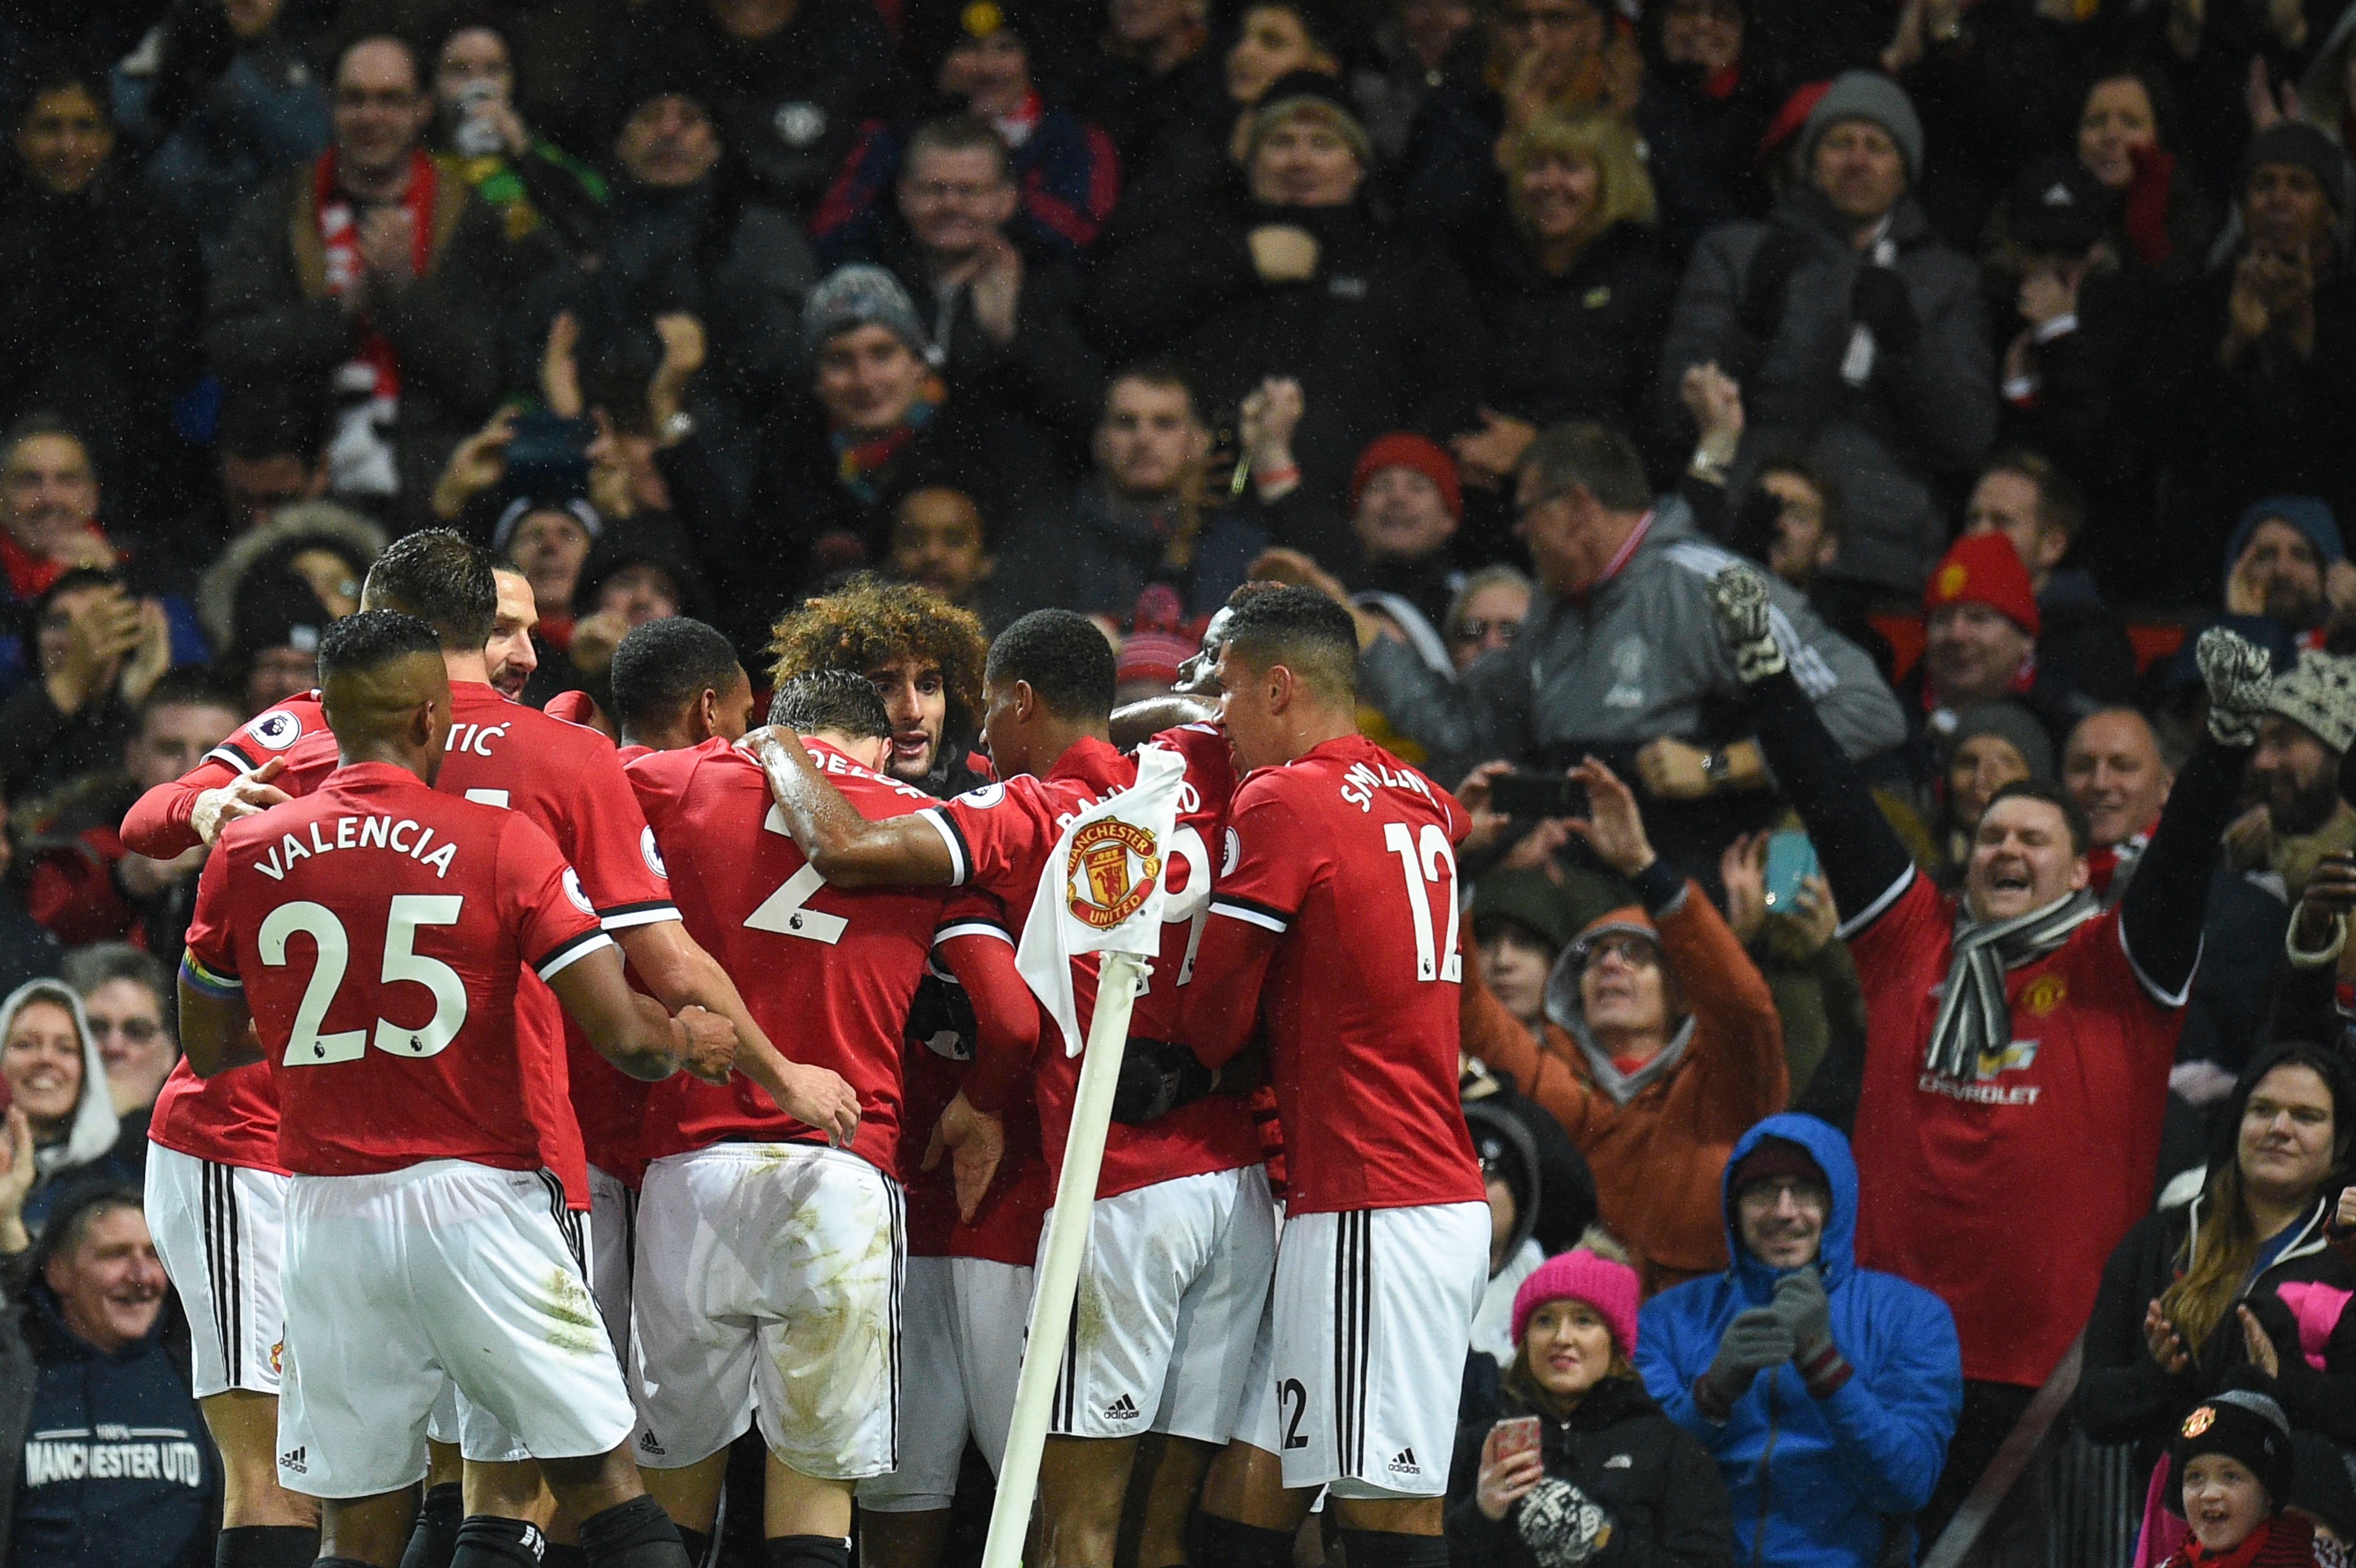 Manchester United players celebrate after Manchester United's English midfielder Ashley Young scored the opening goal during the English Premier League football match between Manchester United and Brighton and Hove Albion at Old Trafford in Manchester, north west England, on November 25, 2017. / AFP PHOTO / Oli SCARFF / RESTRICTED TO EDITORIAL USE. No use with unauthorized audio, video, data, fixture lists, club/league logos or 'live' services. Online in-match use limited to 75 images, no video emulation. No use in betting, games or single club/league/player publications.  /         (Photo credit should read OLI SCARFF/AFP/Getty Images)